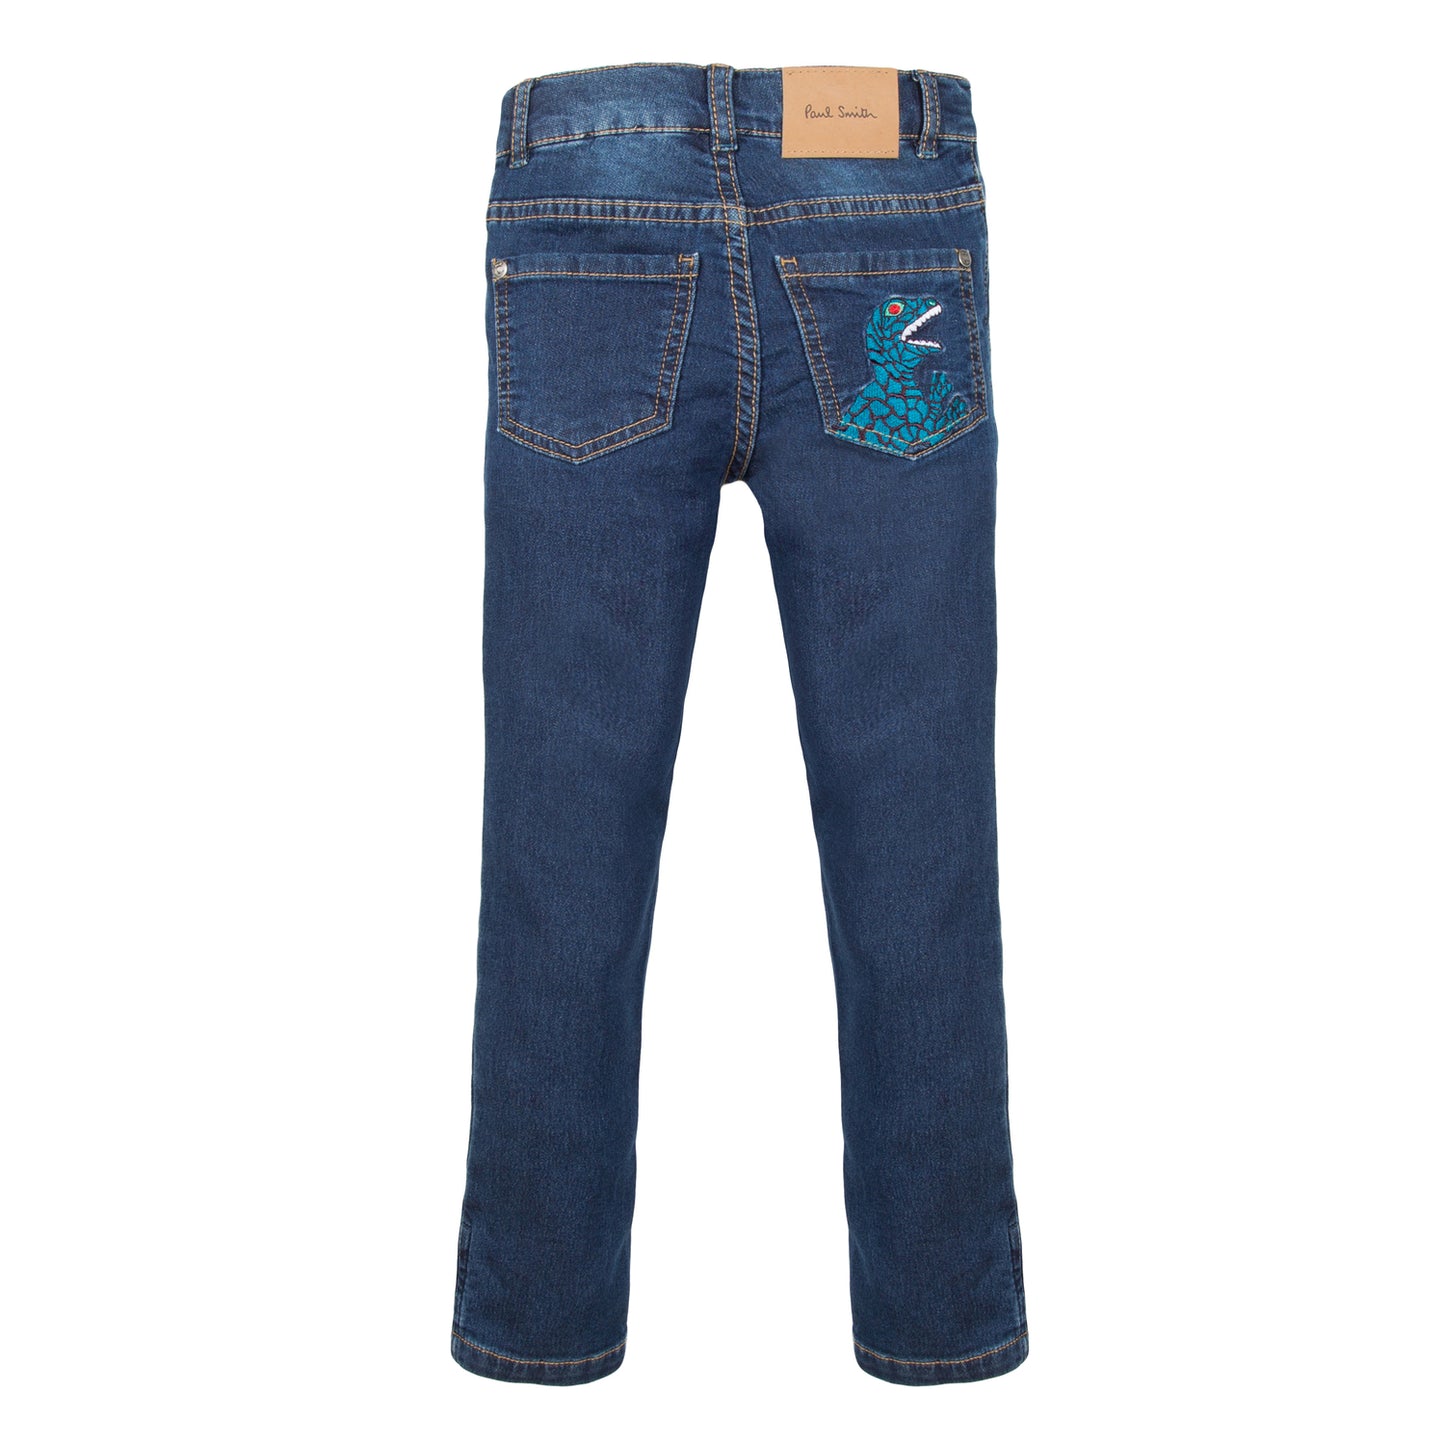 Paul Smith Tennessee Jeans